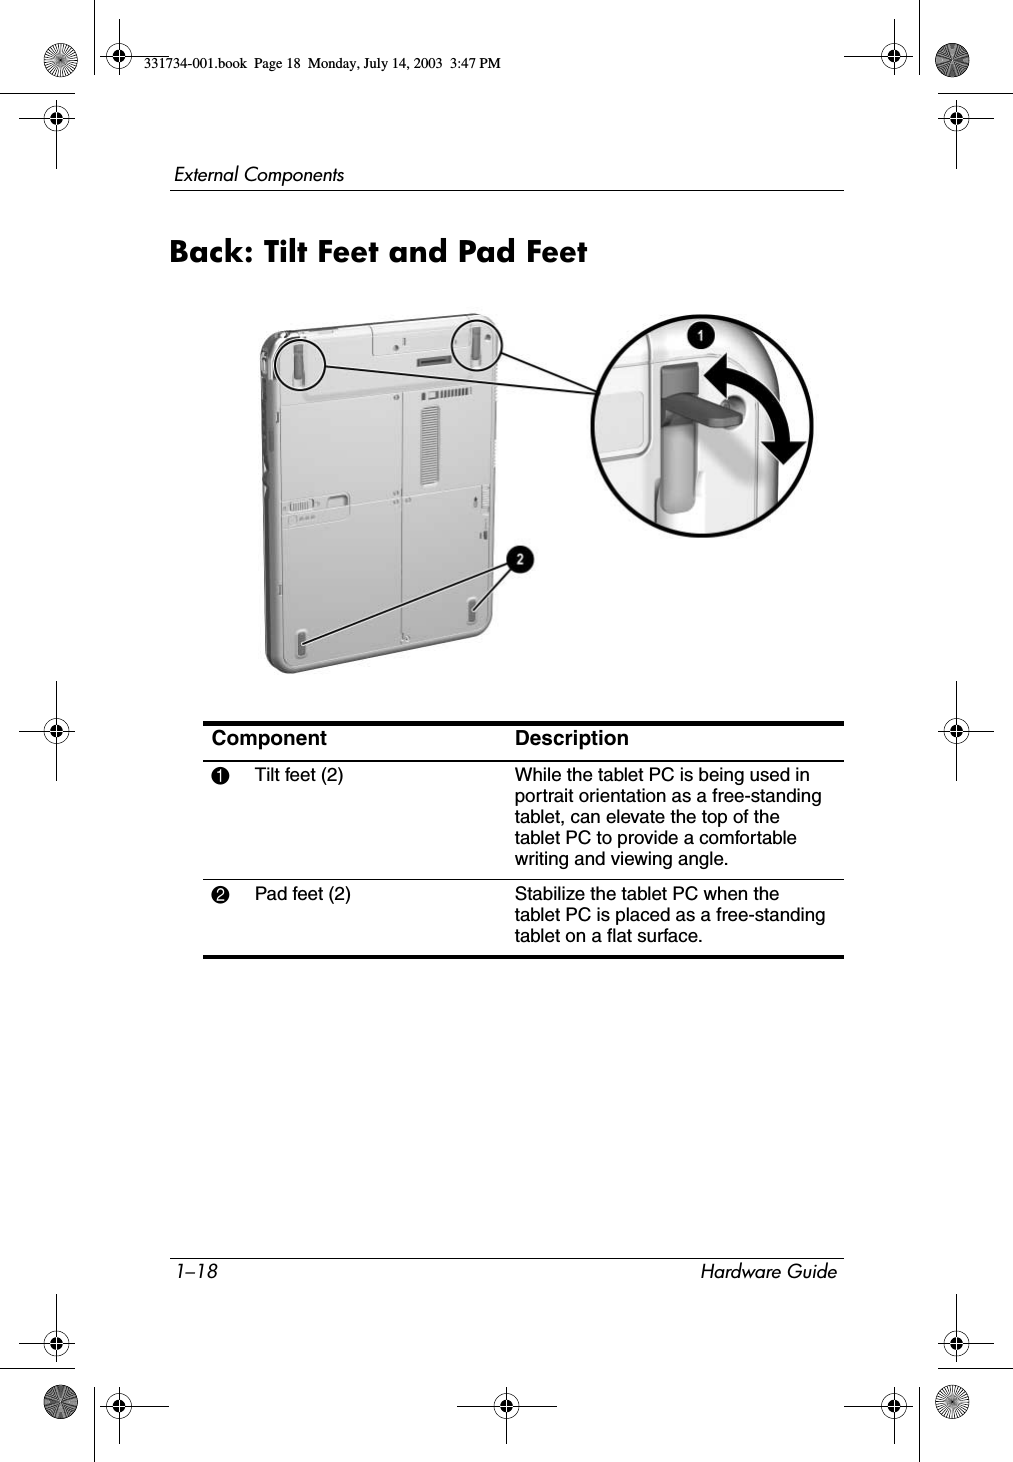 1–18 Hardware GuideExternal ComponentsBack: Tilt Feet and Pad FeetComponent Description1Tilt feet (2) While the tablet PC is being used in portrait orientation as a free-standing tablet, can elevate the top of the tablet PC to provide a comfortable writing and viewing angle.2Pad feet (2) Stabilize the tablet PC when the tablet PC is placed as a free-standing tablet on a flat surface.331734-001.book  Page 18  Monday, July 14, 2003  3:47 PM